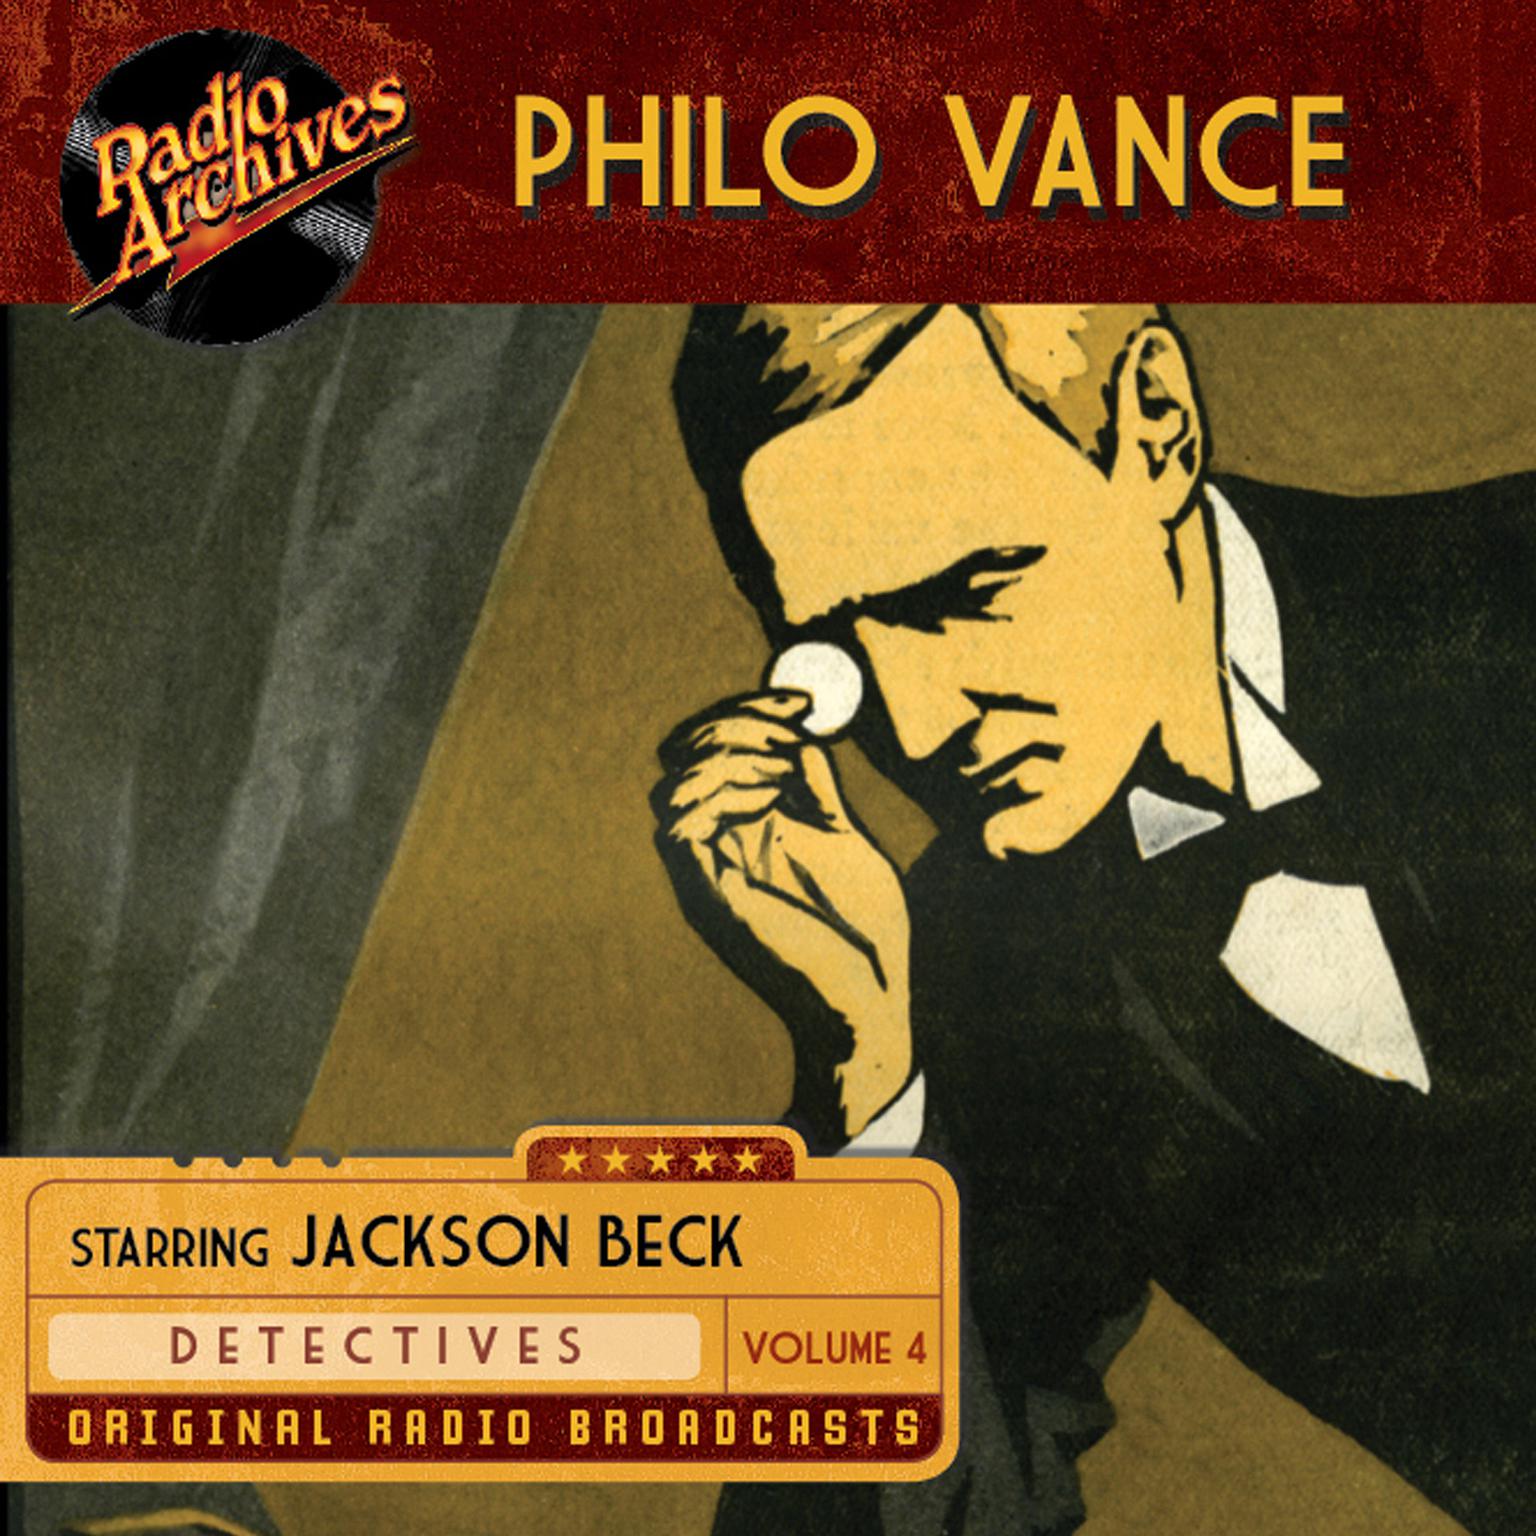 Philo Vance, Vol. 4 Audiobook, by various authors